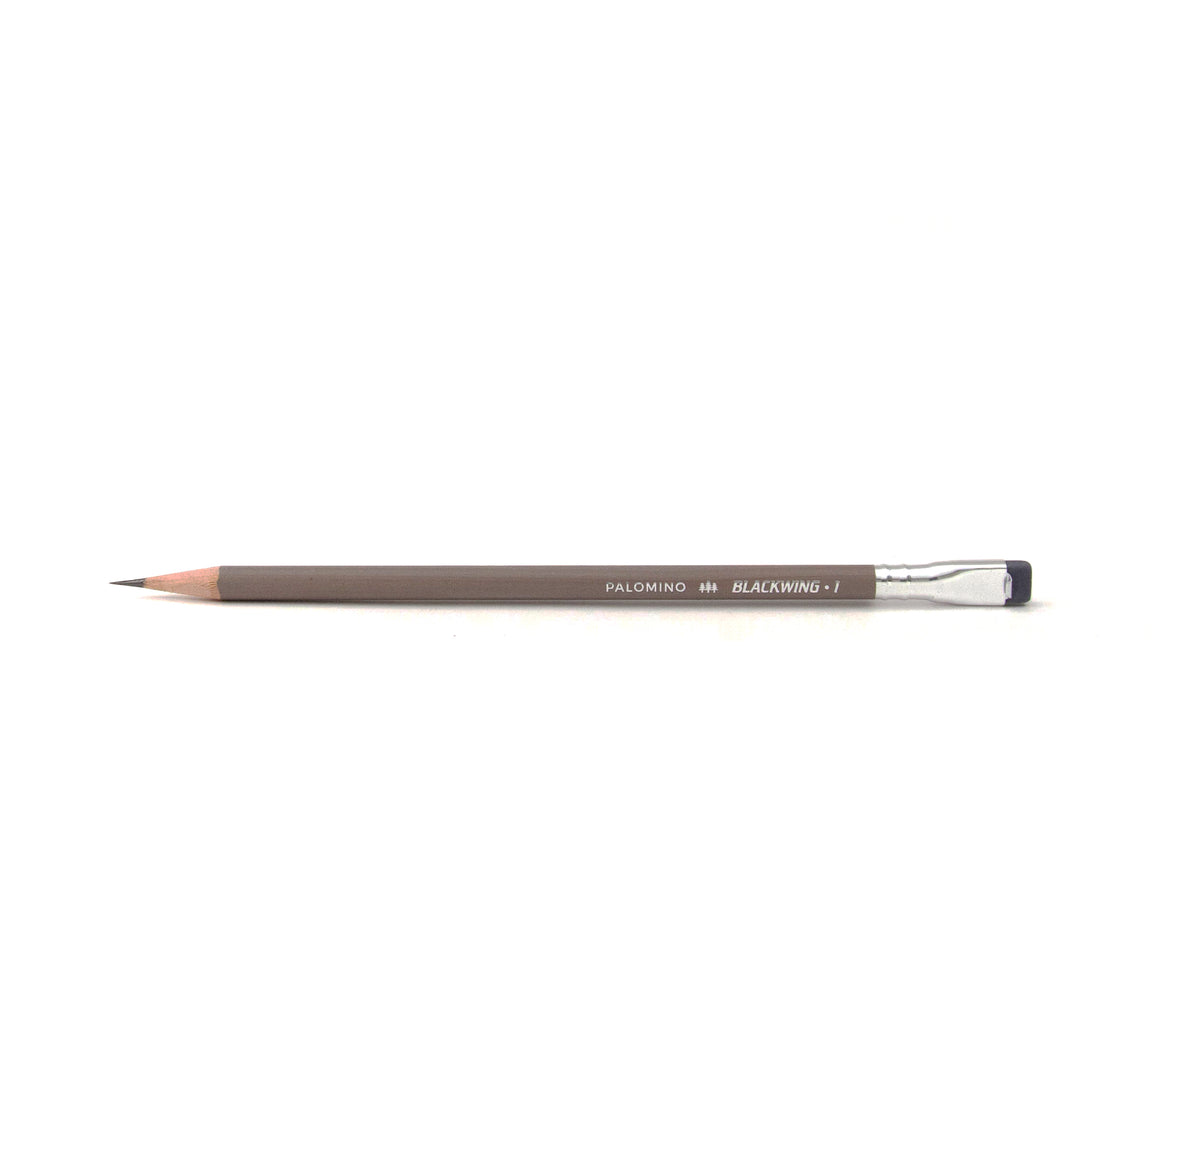 A Blackwing Volume 1 (Set of 12) pencil resting on a white surface.